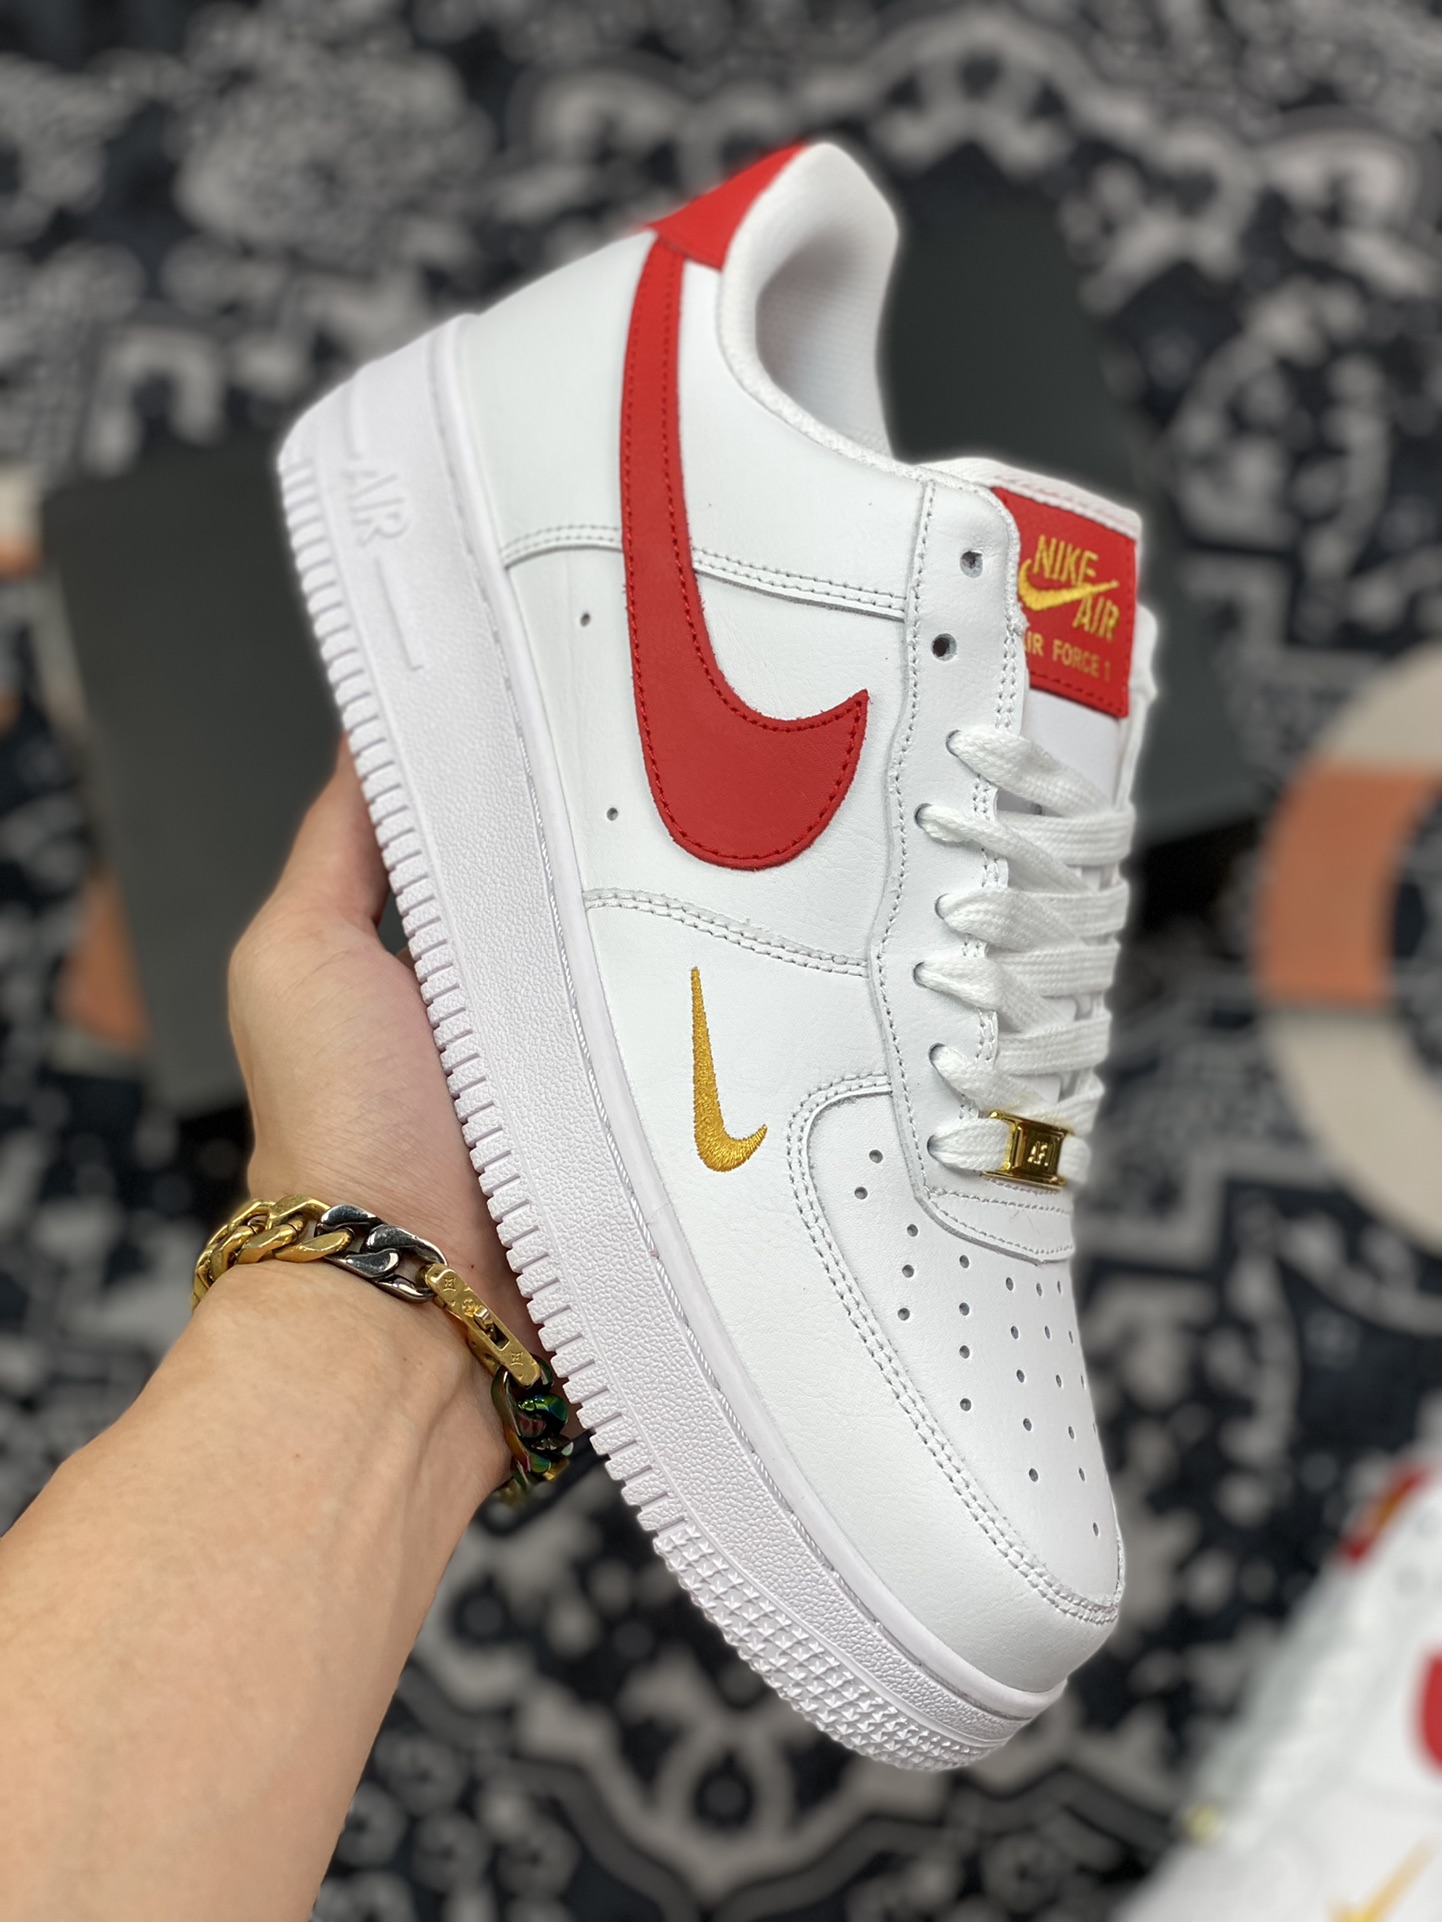 Nike Air Force 1 '07 Essential White/Gym Red For Sale – Sneaker Hello